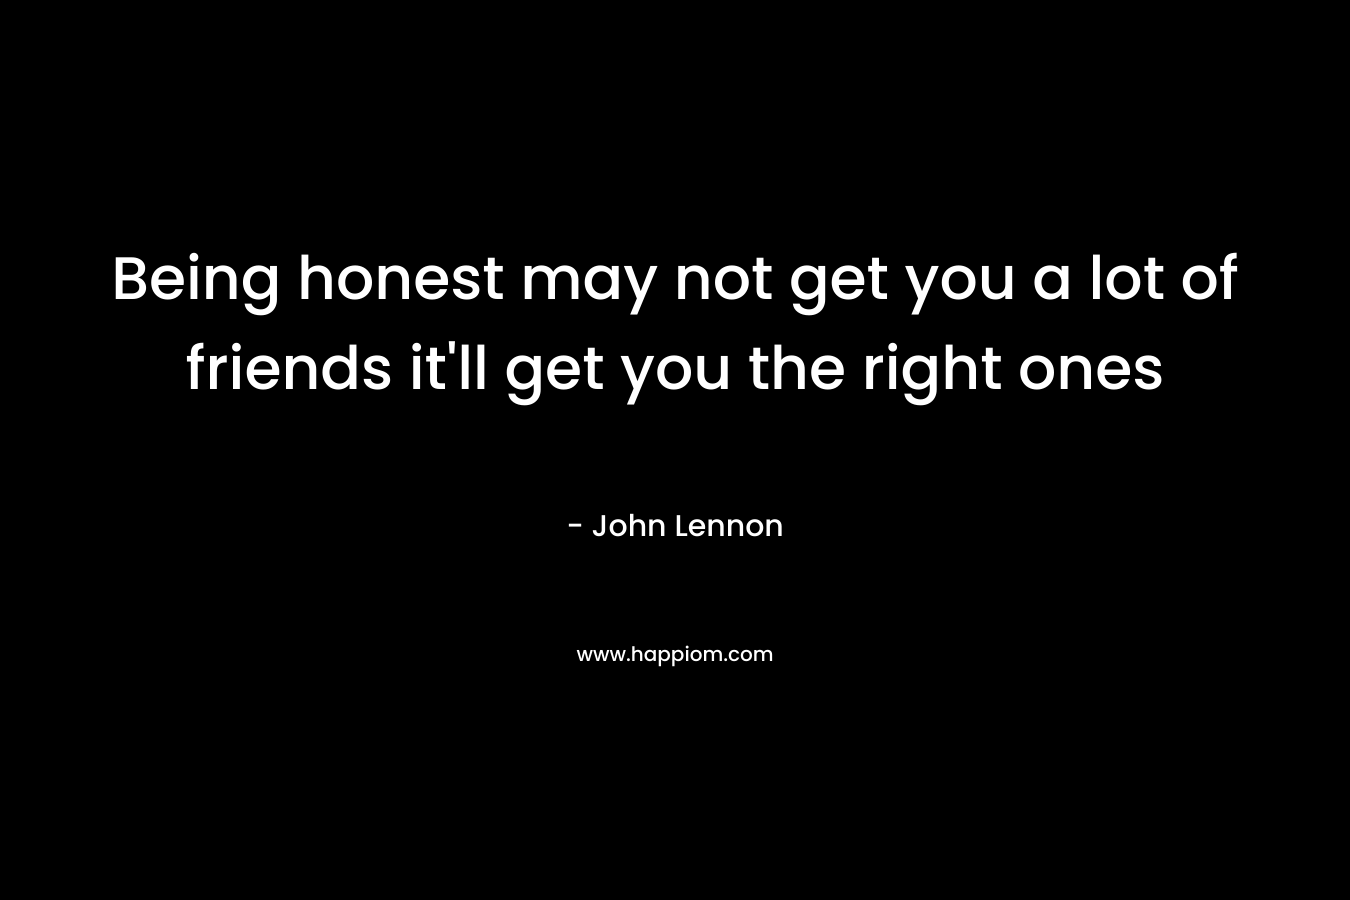 Being honest may not get you a lot of friends it’ll get you the right ones – John Lennon